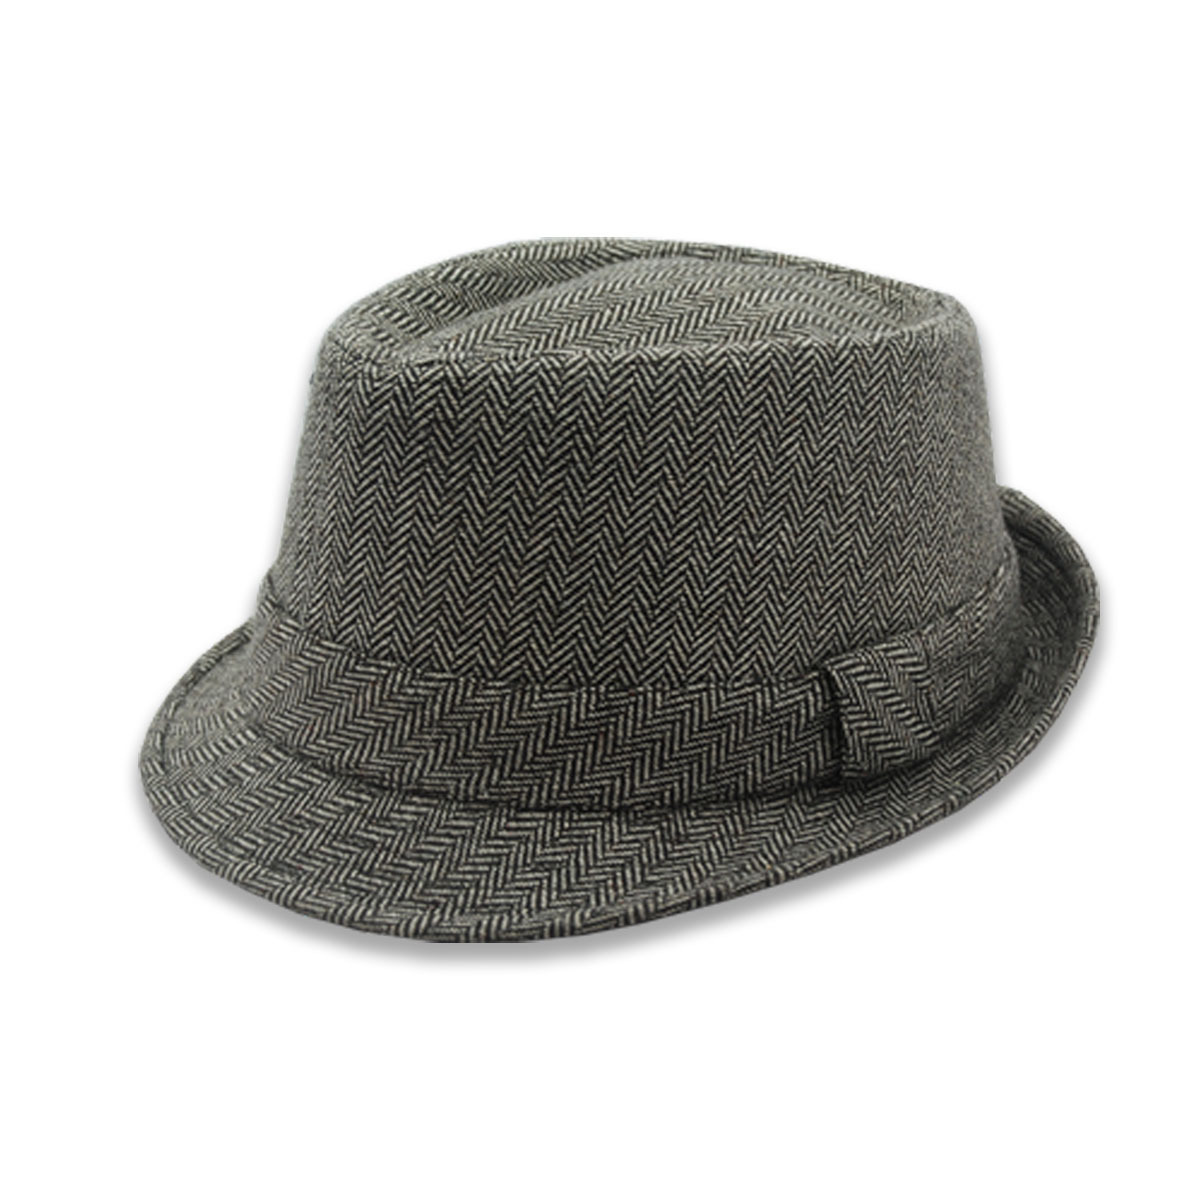 Captale card heather grey check jazz hat fashion hat male commercial